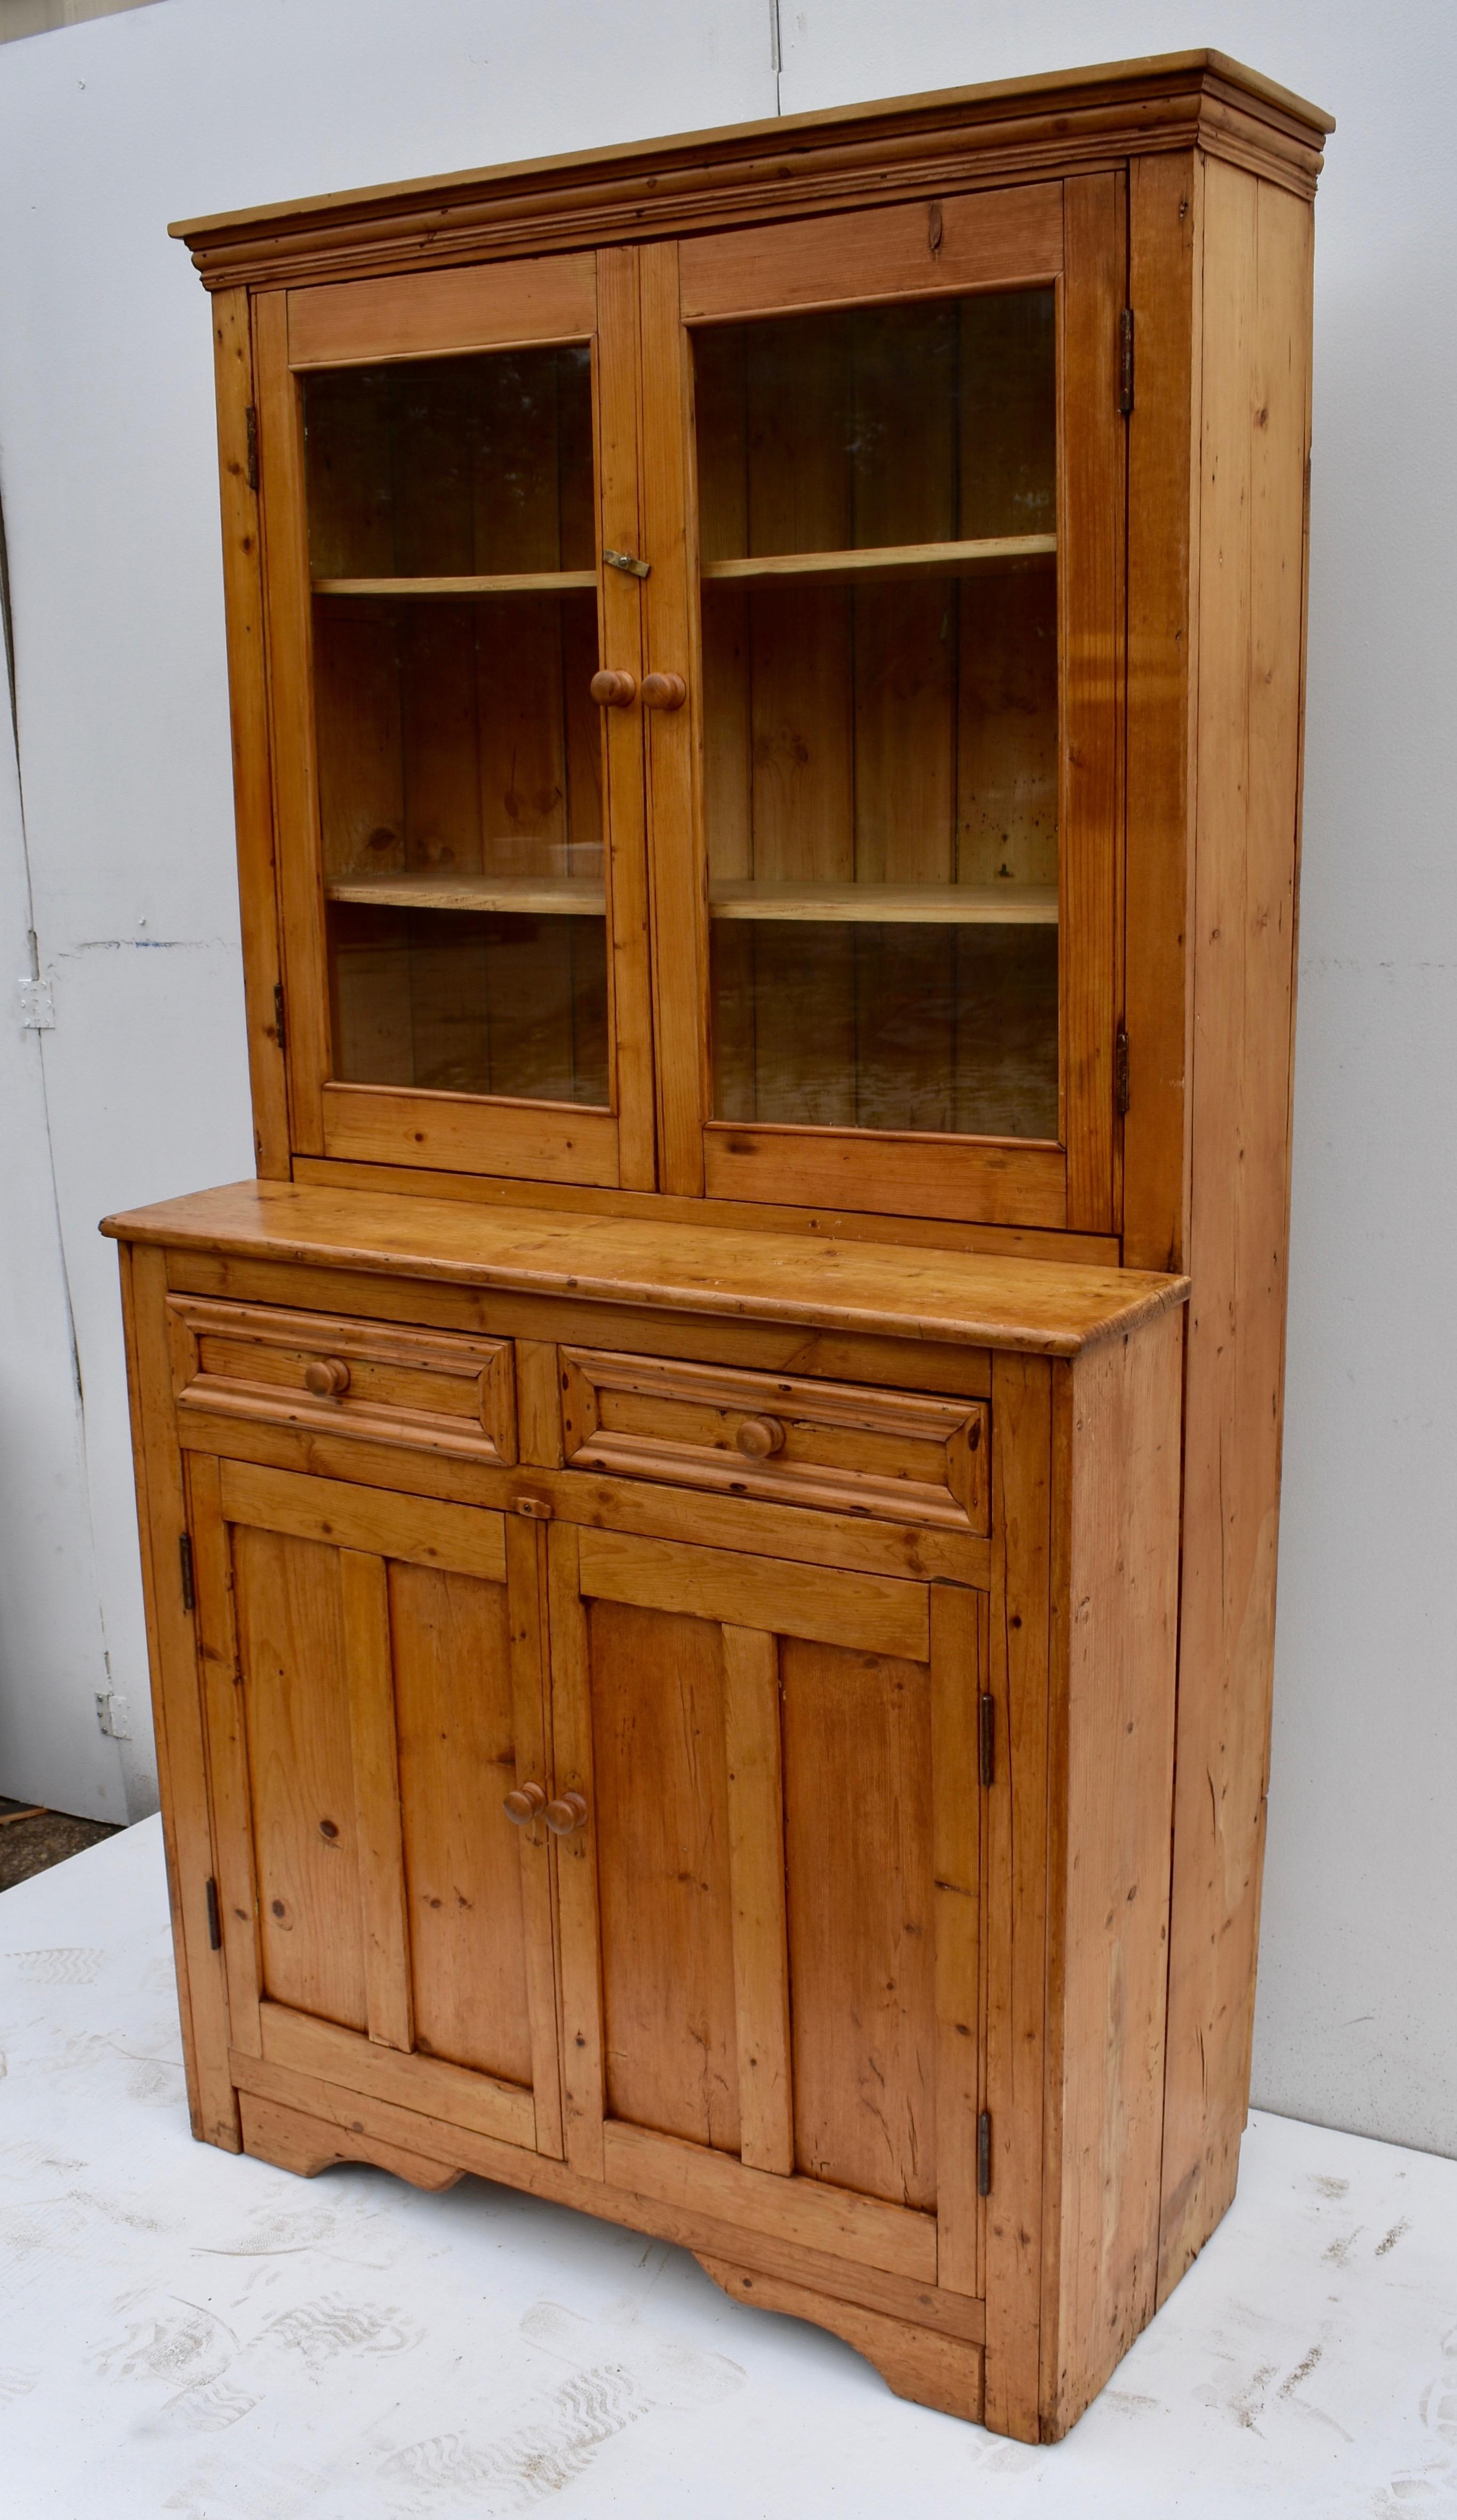 This is a fine example of an Irish glazed dresser from Co. Sligo, built in one piece, as is typical, and in almost entirely original condition.
The upper section features a bold crown molding above two wide-swinging doors which still retain their